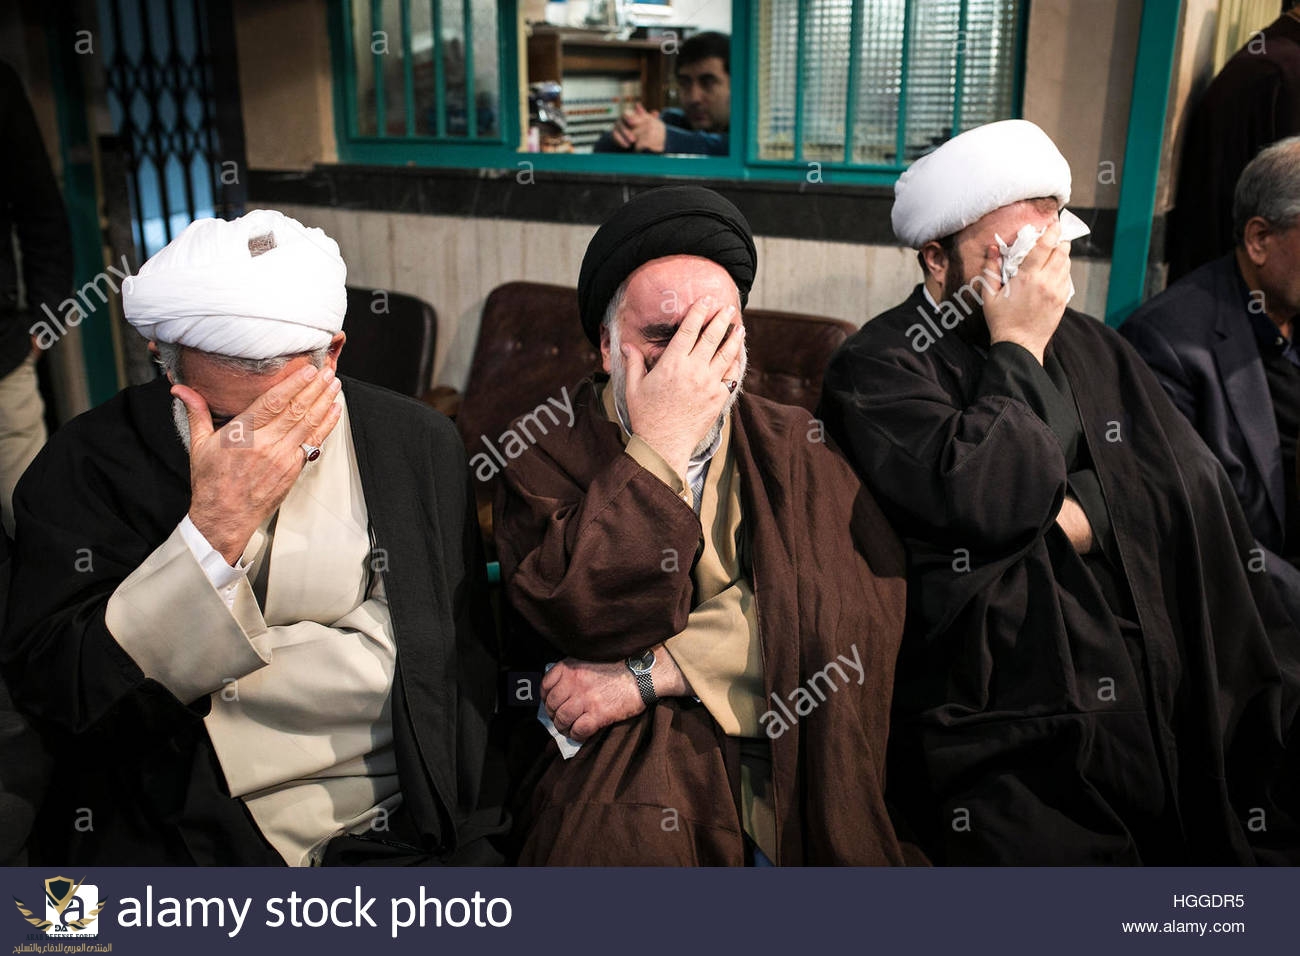 tehran-iran-9th-jan-2017-iranian-clerics-cry-during-a-mourning-ceremony-HGGDR5.jpg